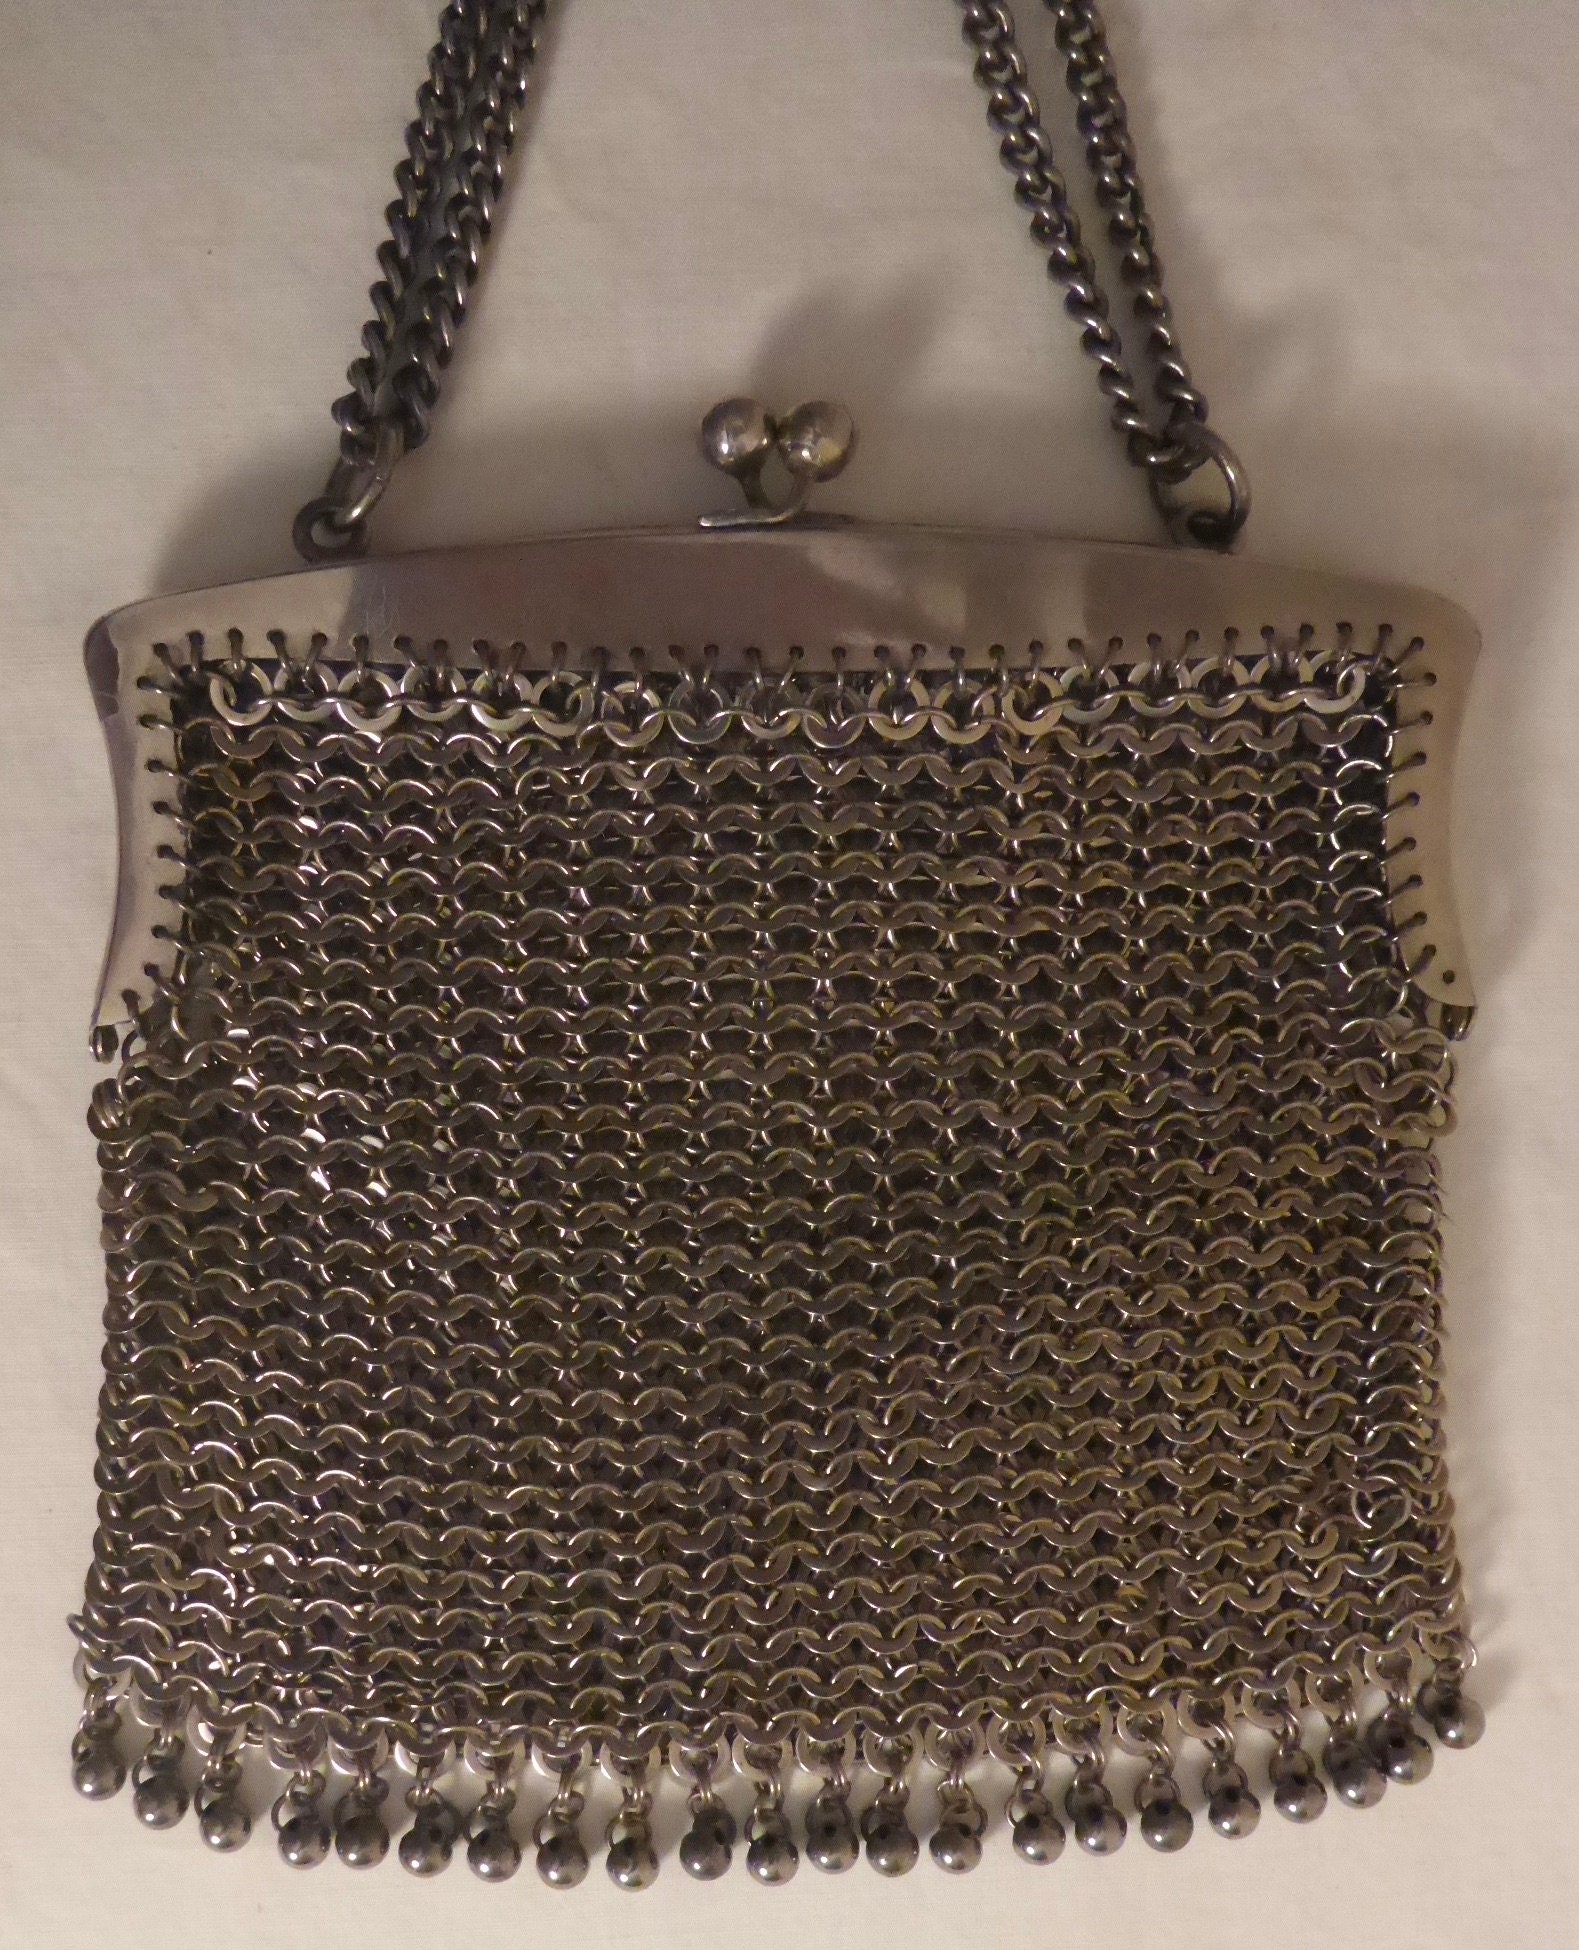 Buy Antique Chain Mail Original Coin Purse, Antique Wallet, Vintage  Chainmail Purse From the 1920s / 1930s, Chainmail Coin Purse, Damaged  Online in India - Etsy